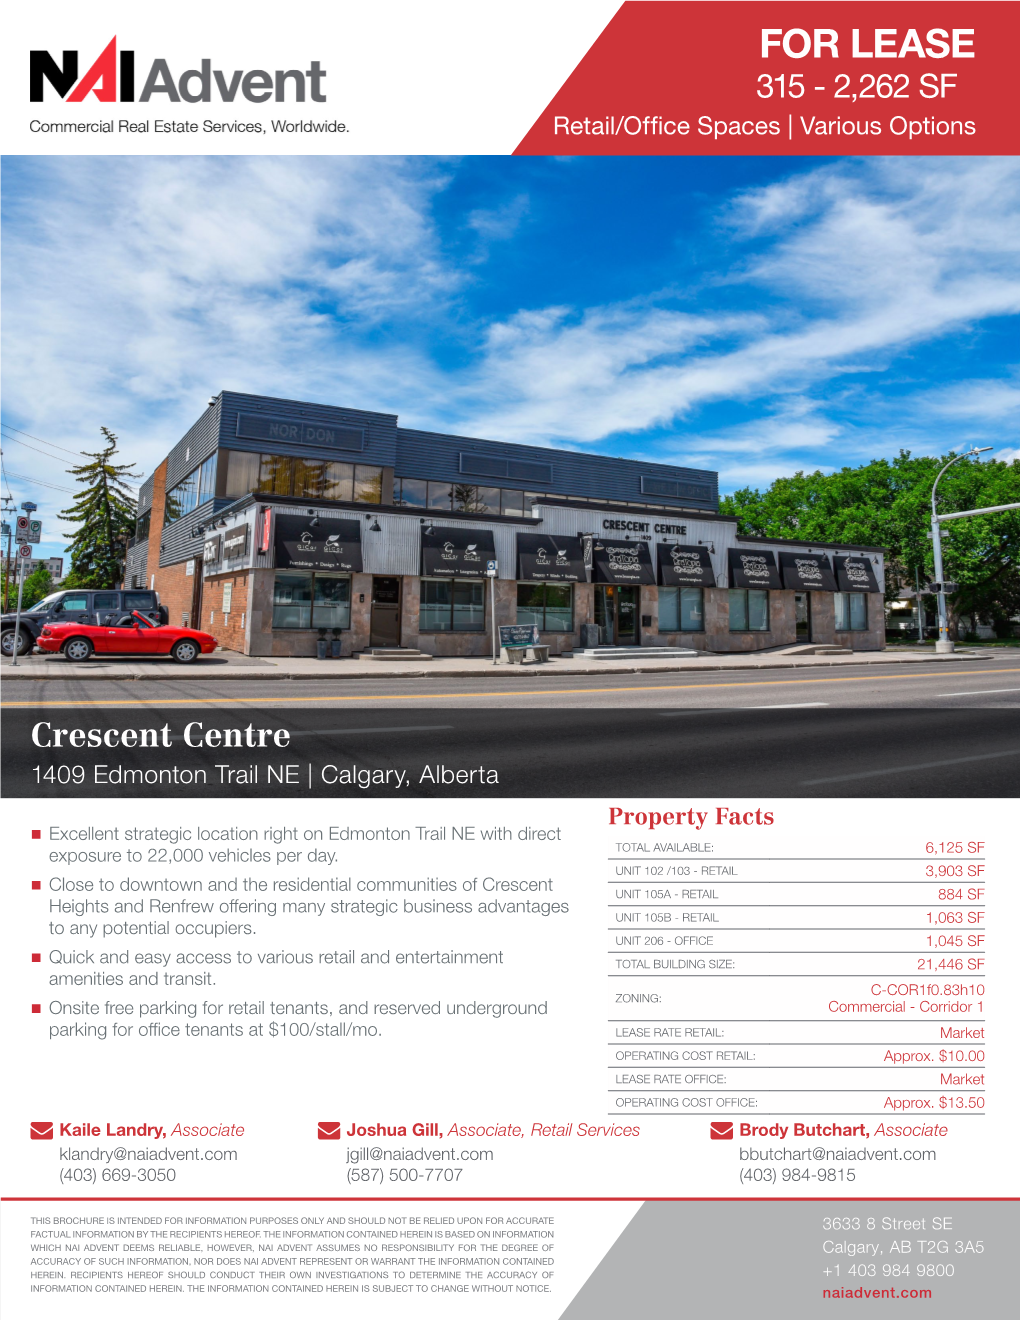 FOR LEASE 315 - 2,262 SF± Retail/Office Spaces | Various Options